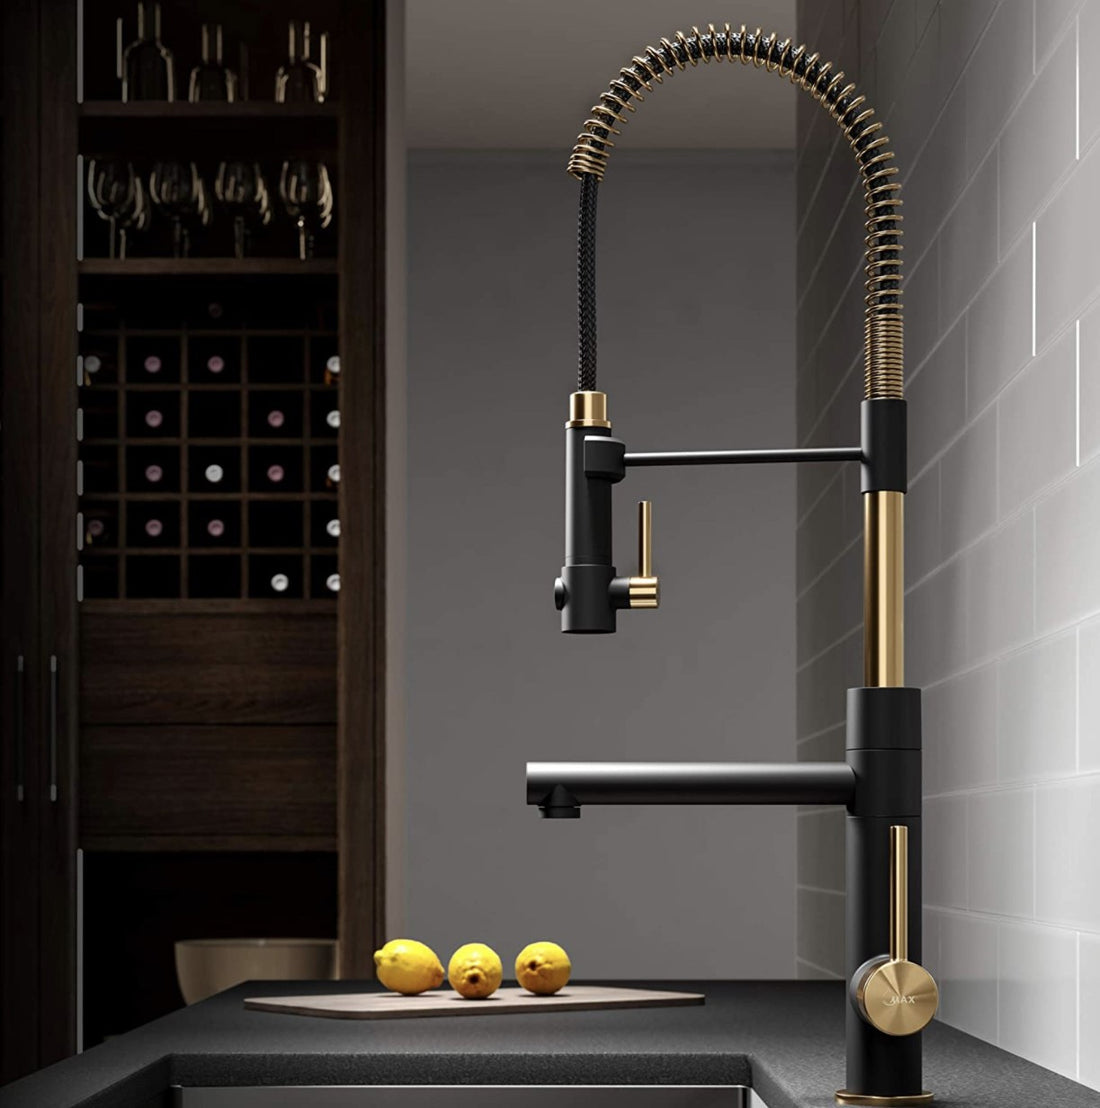 Flexible Pull-Down Kitchen Faucets MAX Faucets MAX